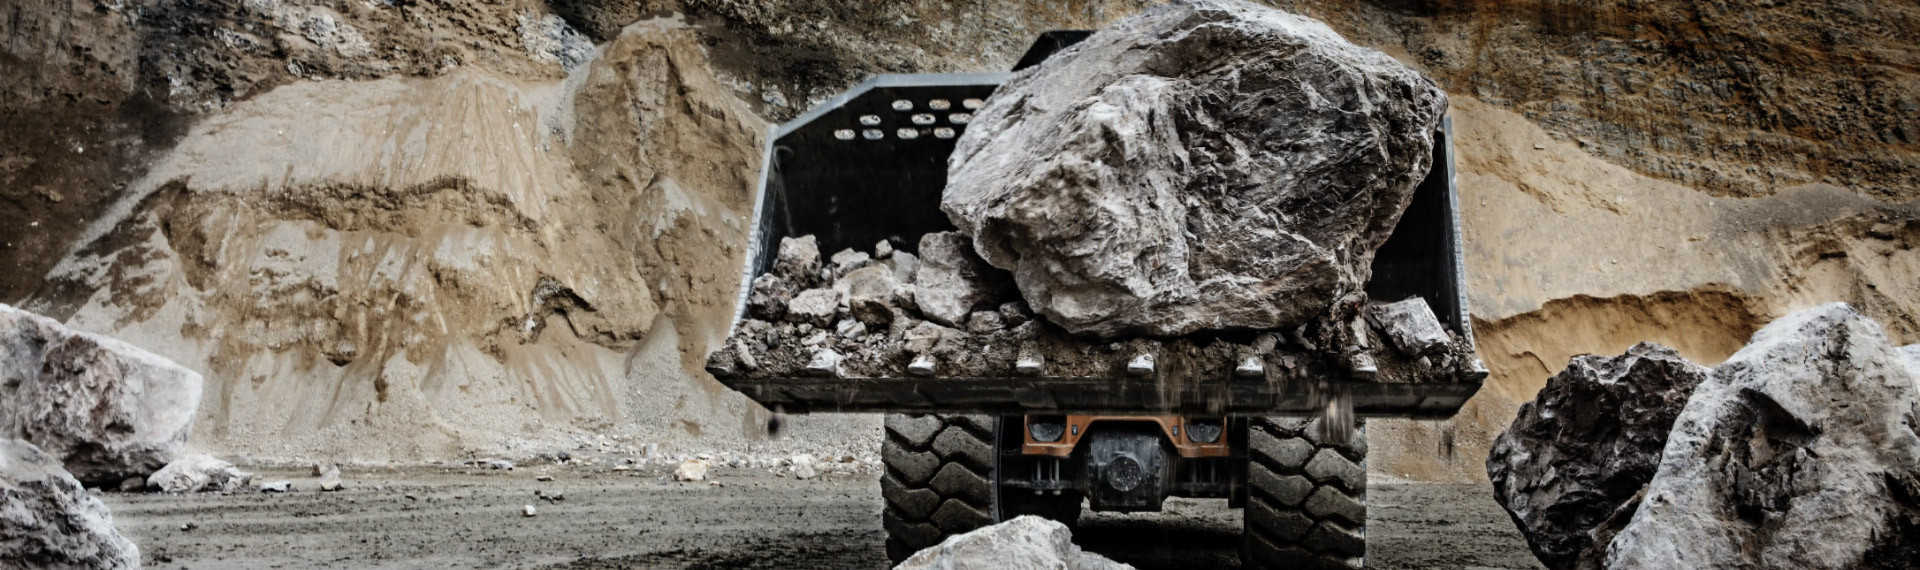 A wheel loader made in Hardox® steel in a quarry carrying a gigantic rock